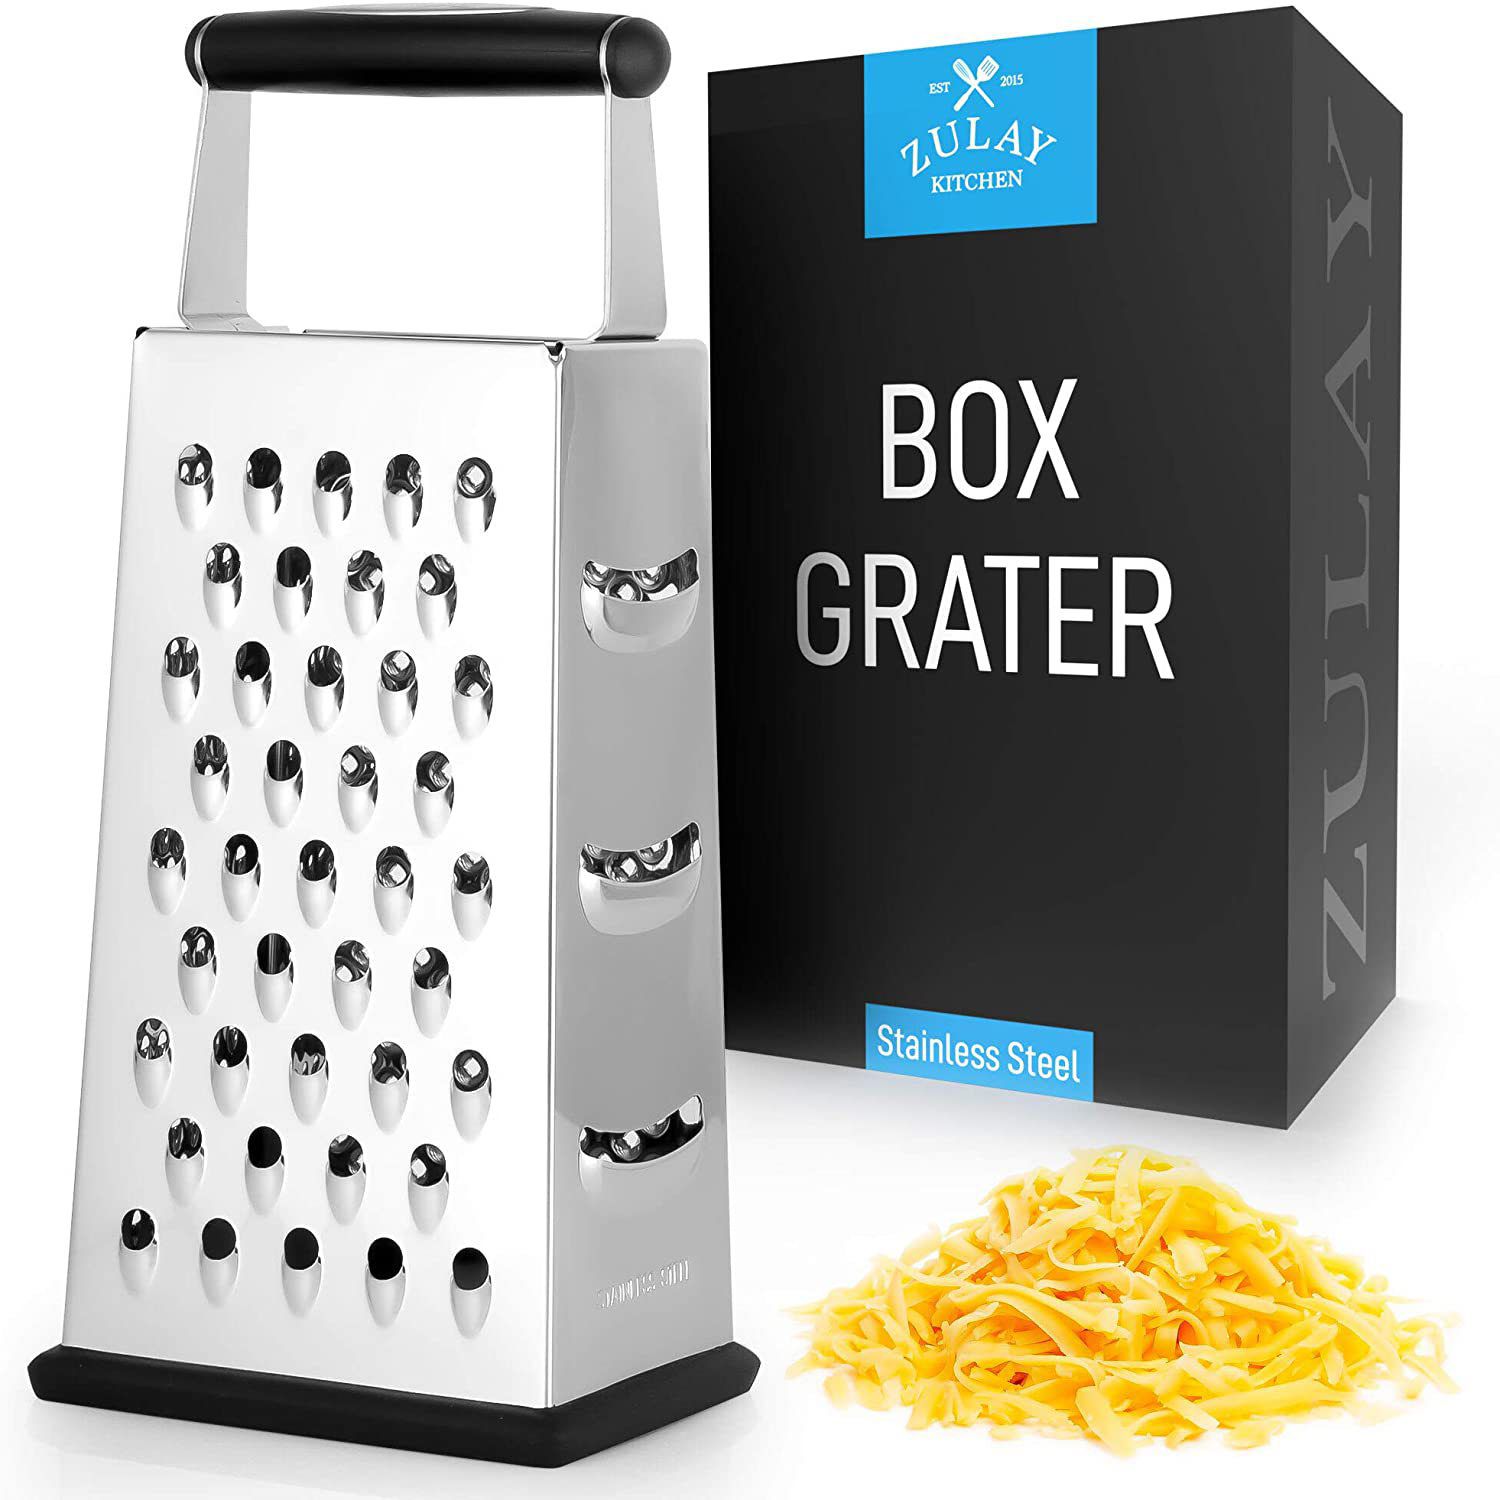 Streamlined Kitchen Graters : Rotary Cheese Grater